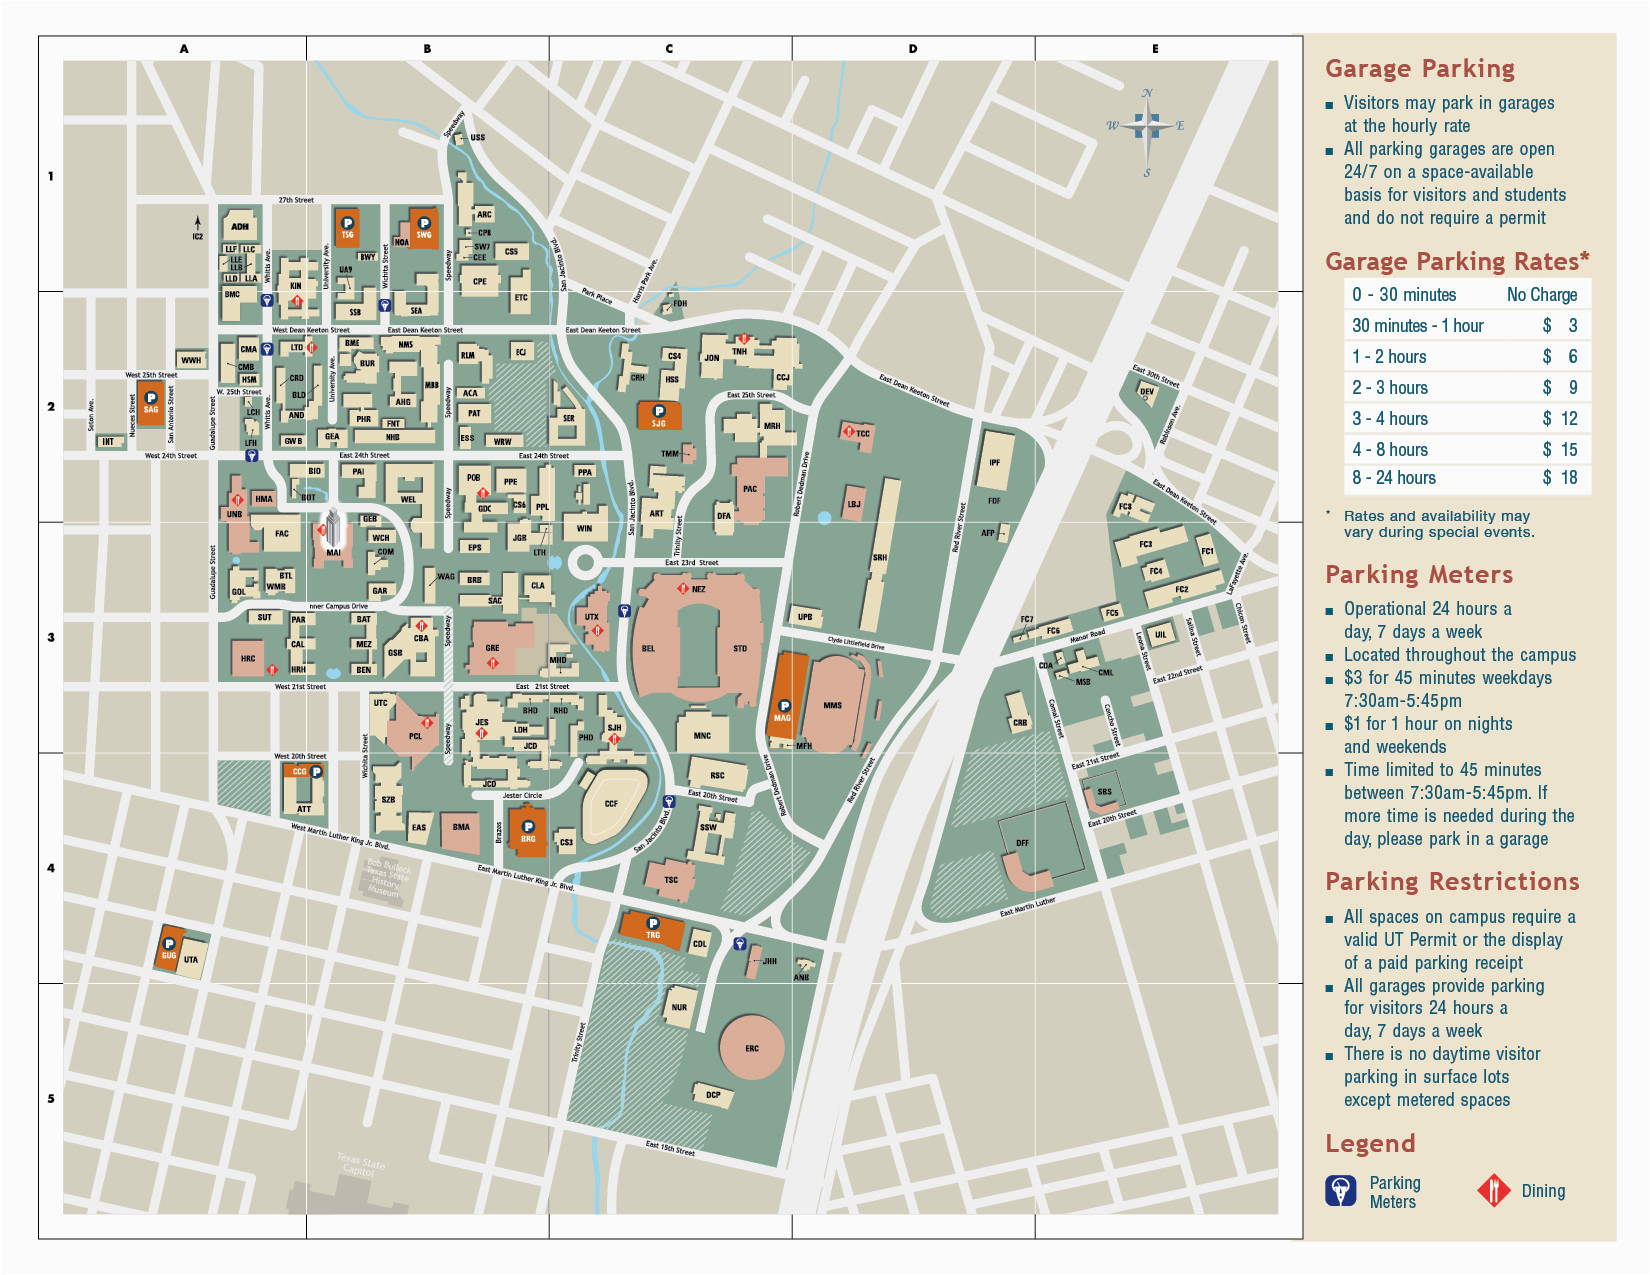 university of texas at austin campus map business ideas 2013